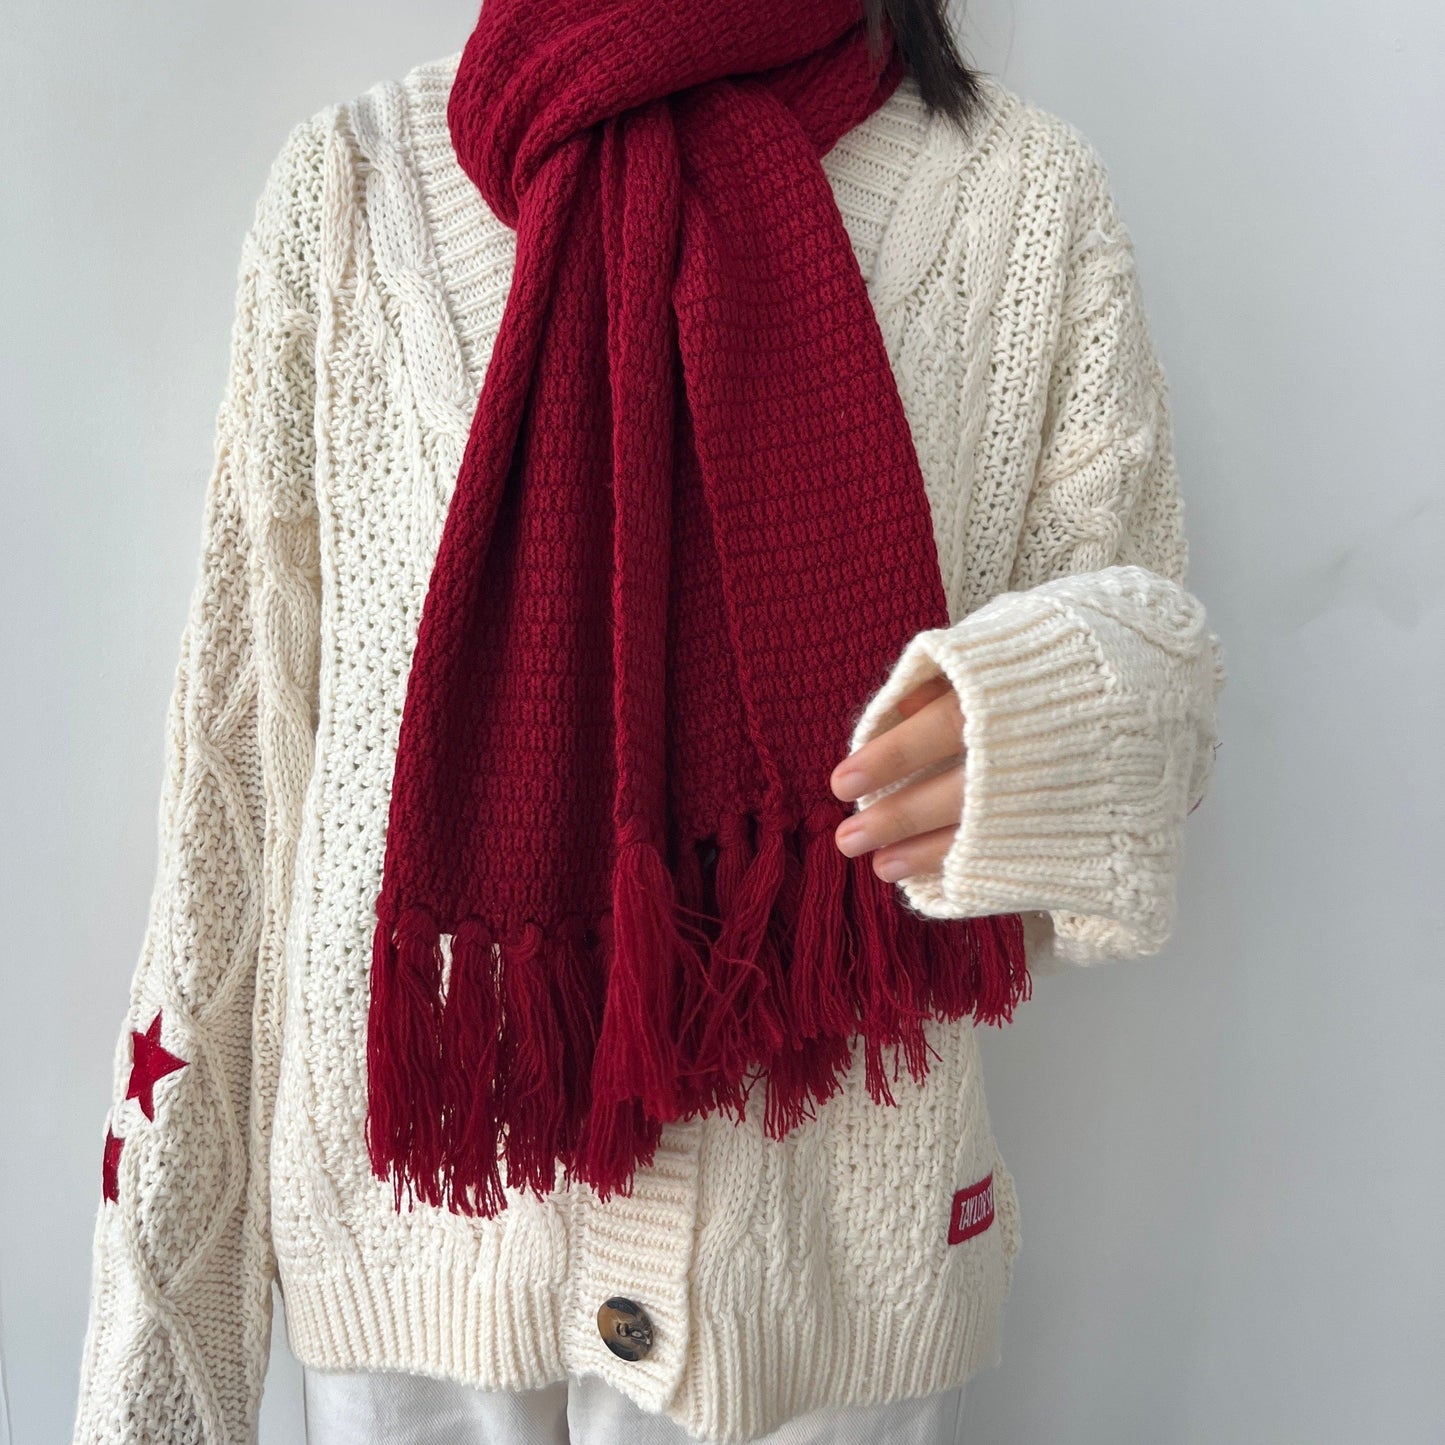 Red Cardigan Taylors Version Sweater With All Too Well Scarf